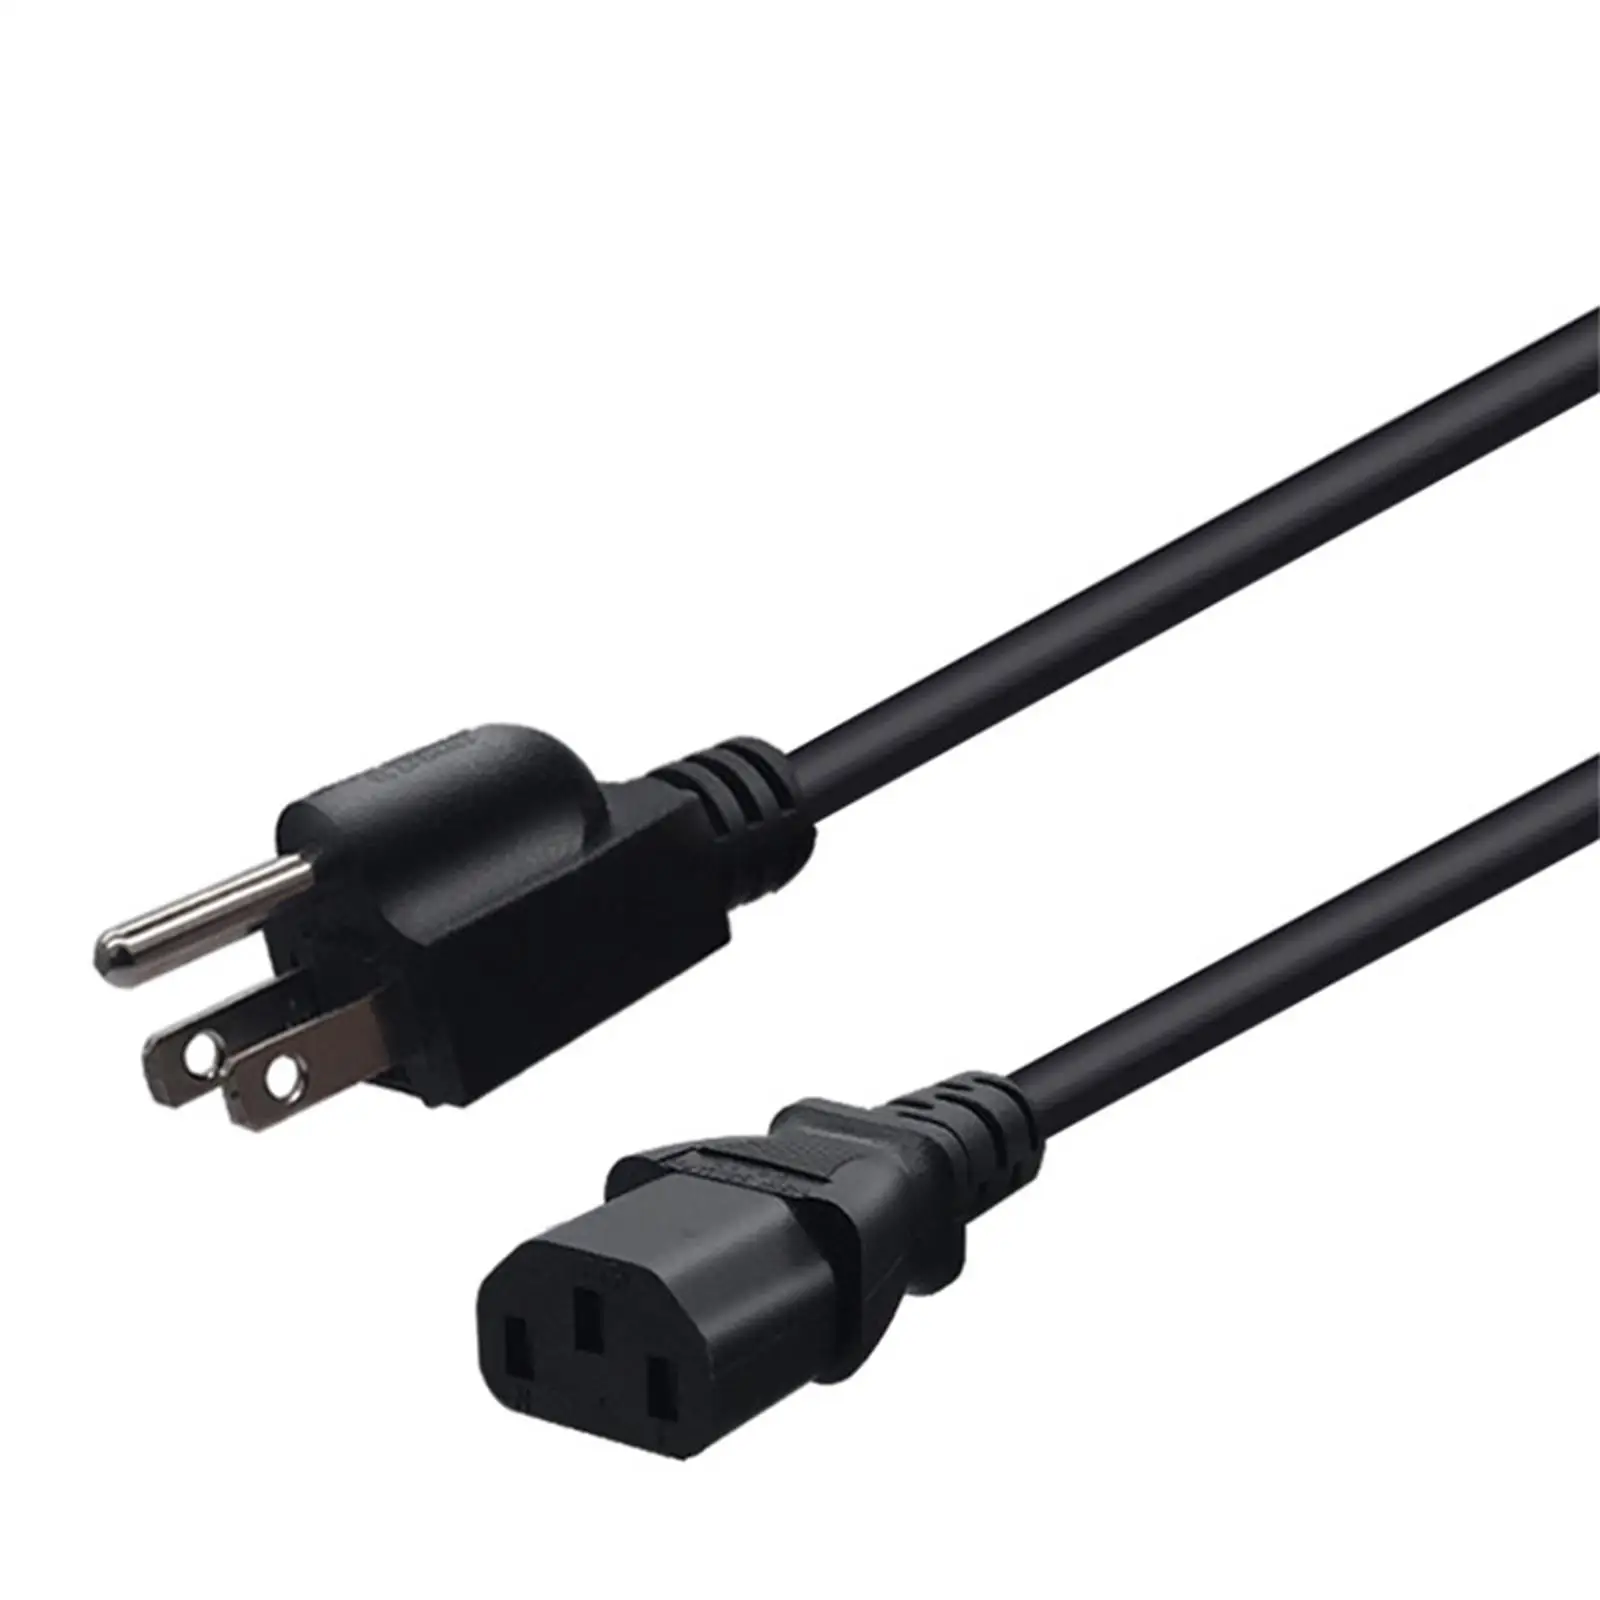 5-15P to IEC320 C13 Power Cord 3Pin Connection Cable Universal for Monitor